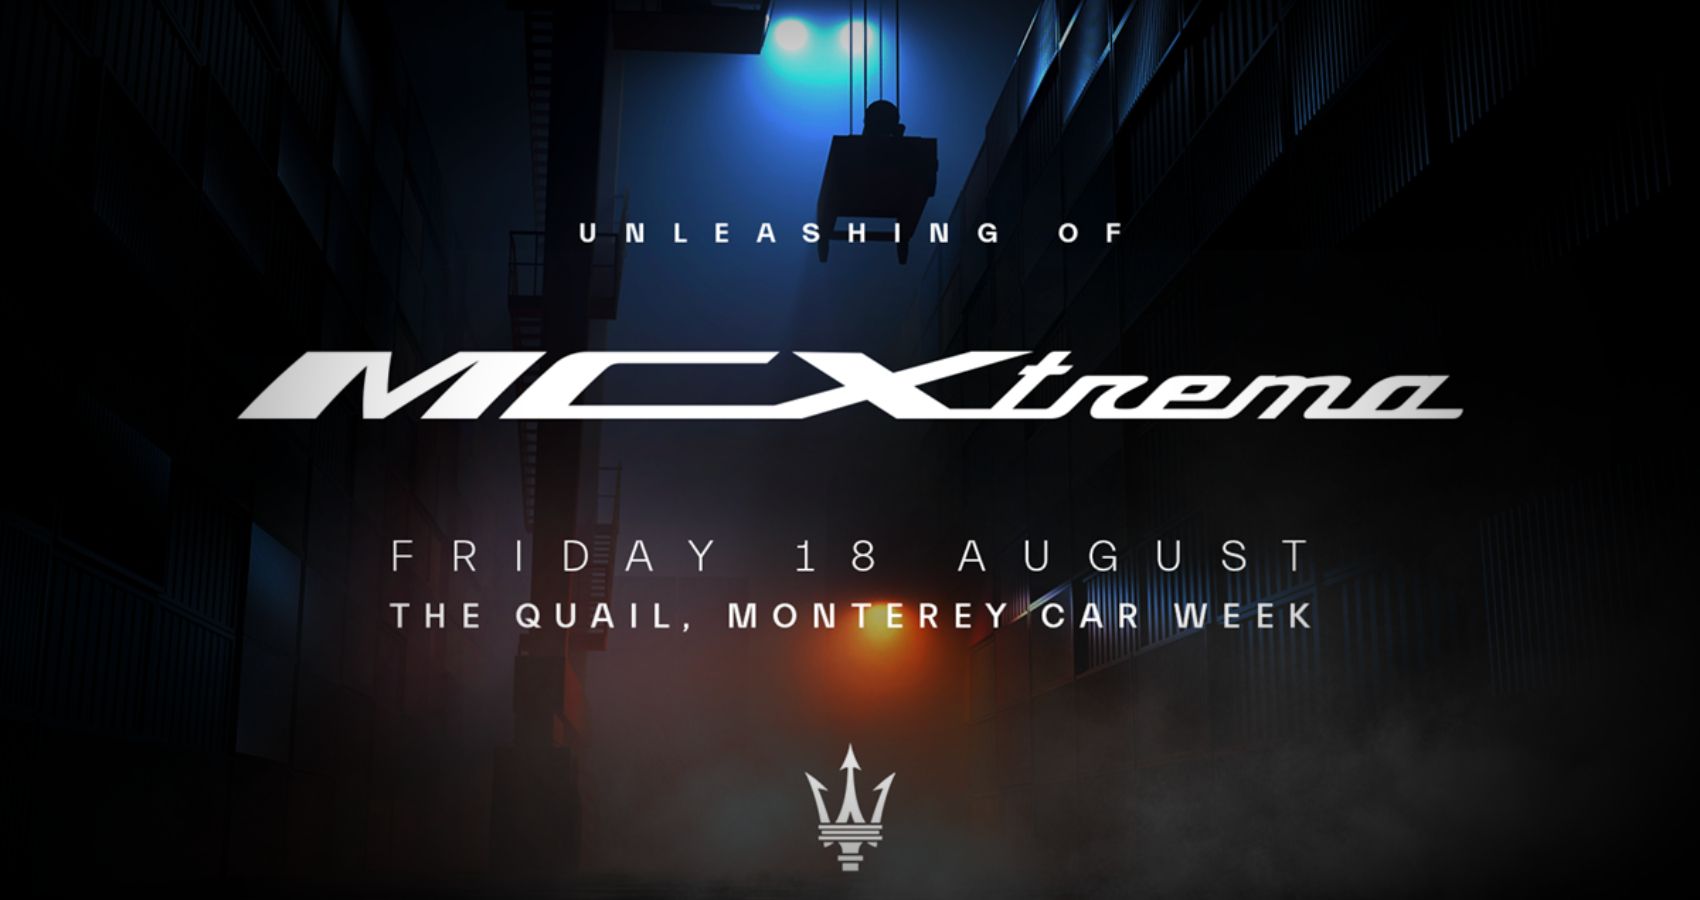 Maserati MCXtrema To Be Unveiled On 18th August